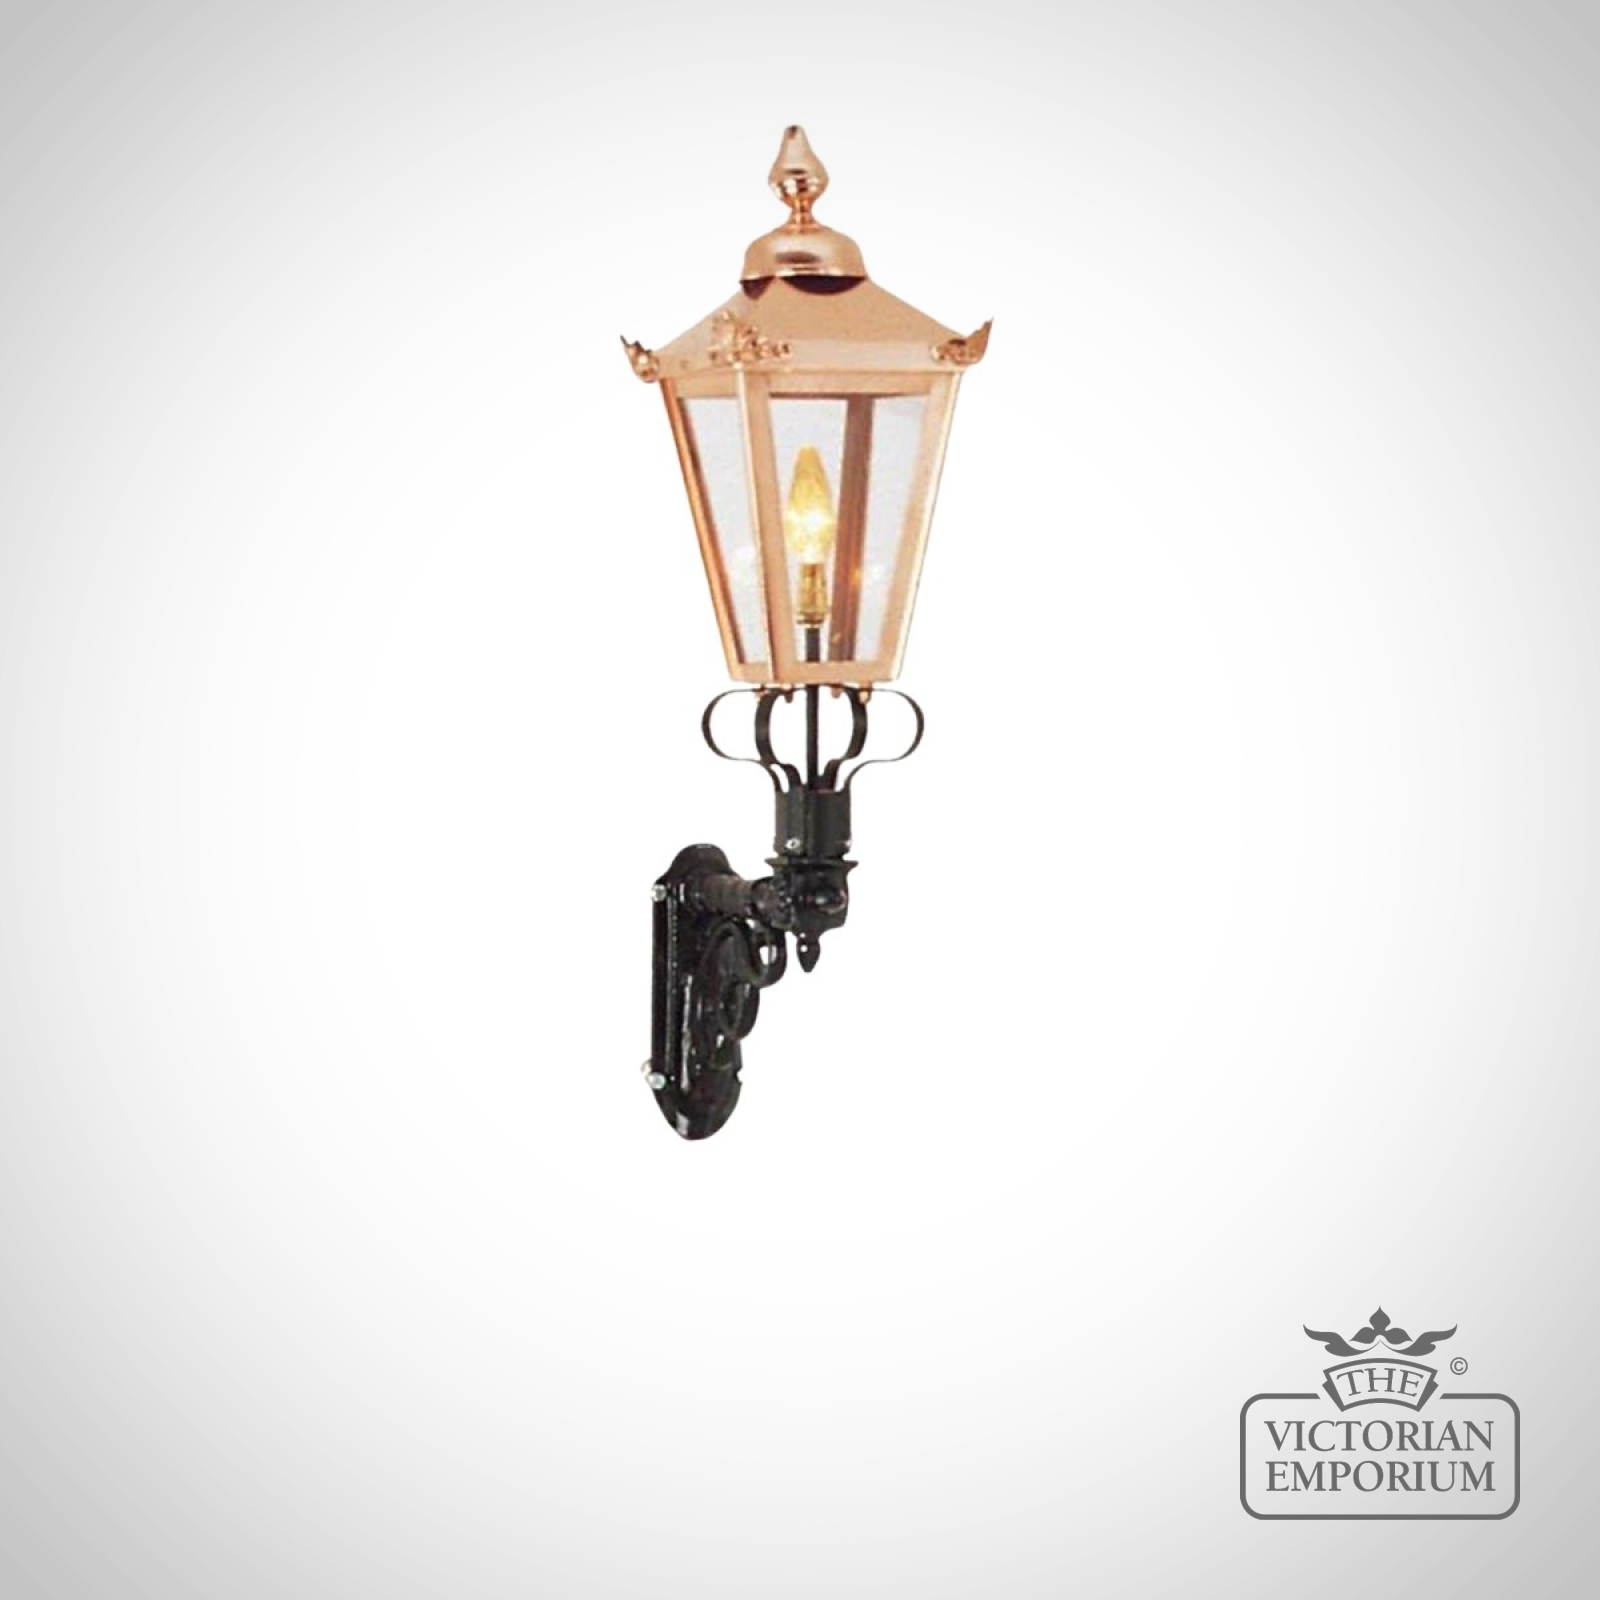 Small Square Copper Wall Lantern with Cast Bracket